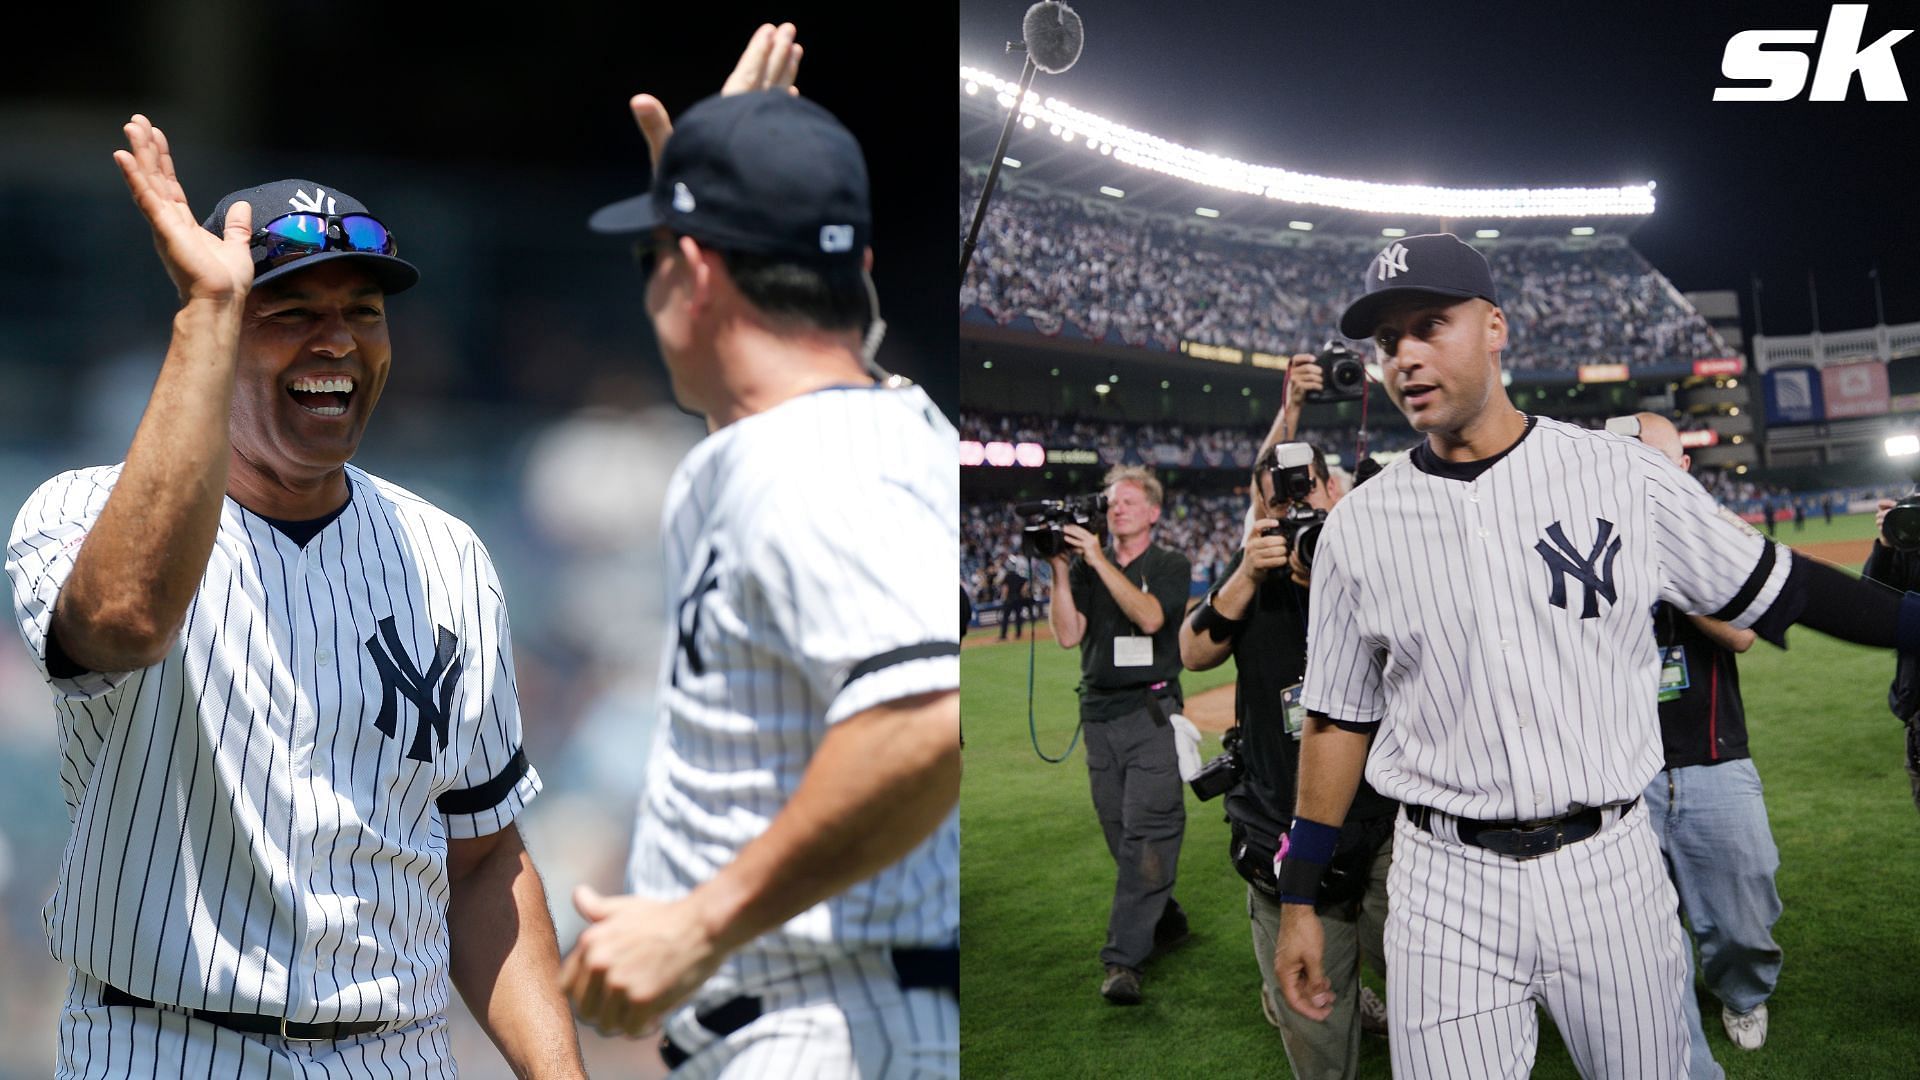 When is Yankees Old-Timers' Day? Derek Jeter's participation